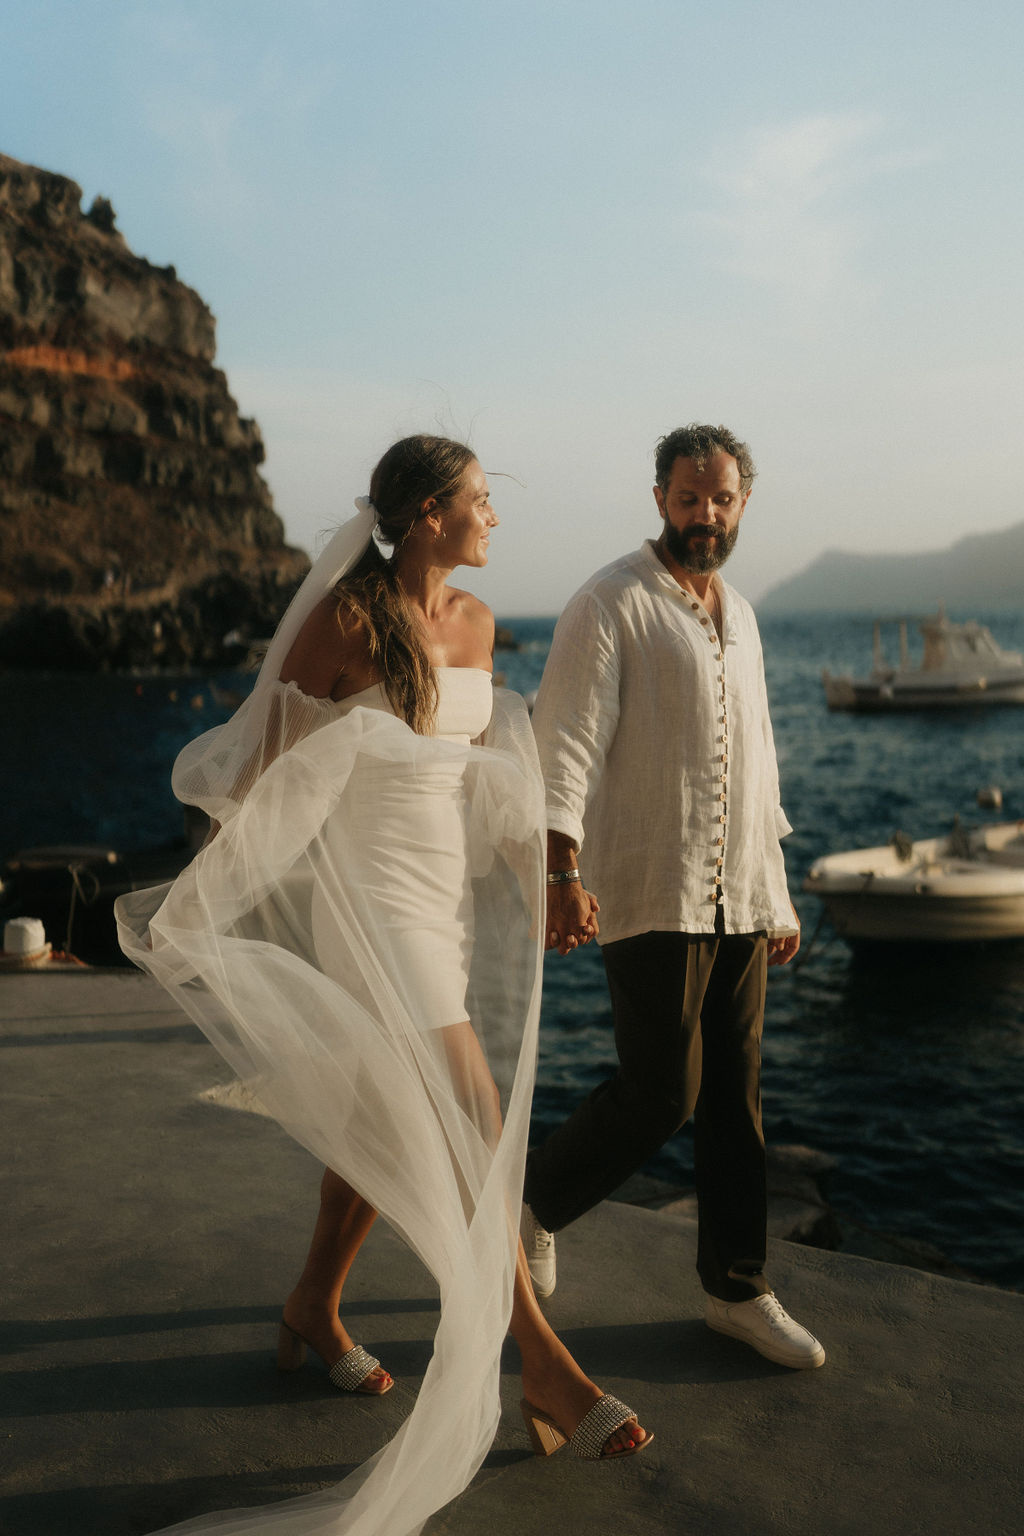 A bride and groom holding hands and walking on a pier, with the sea and hills in the background in santorini greece